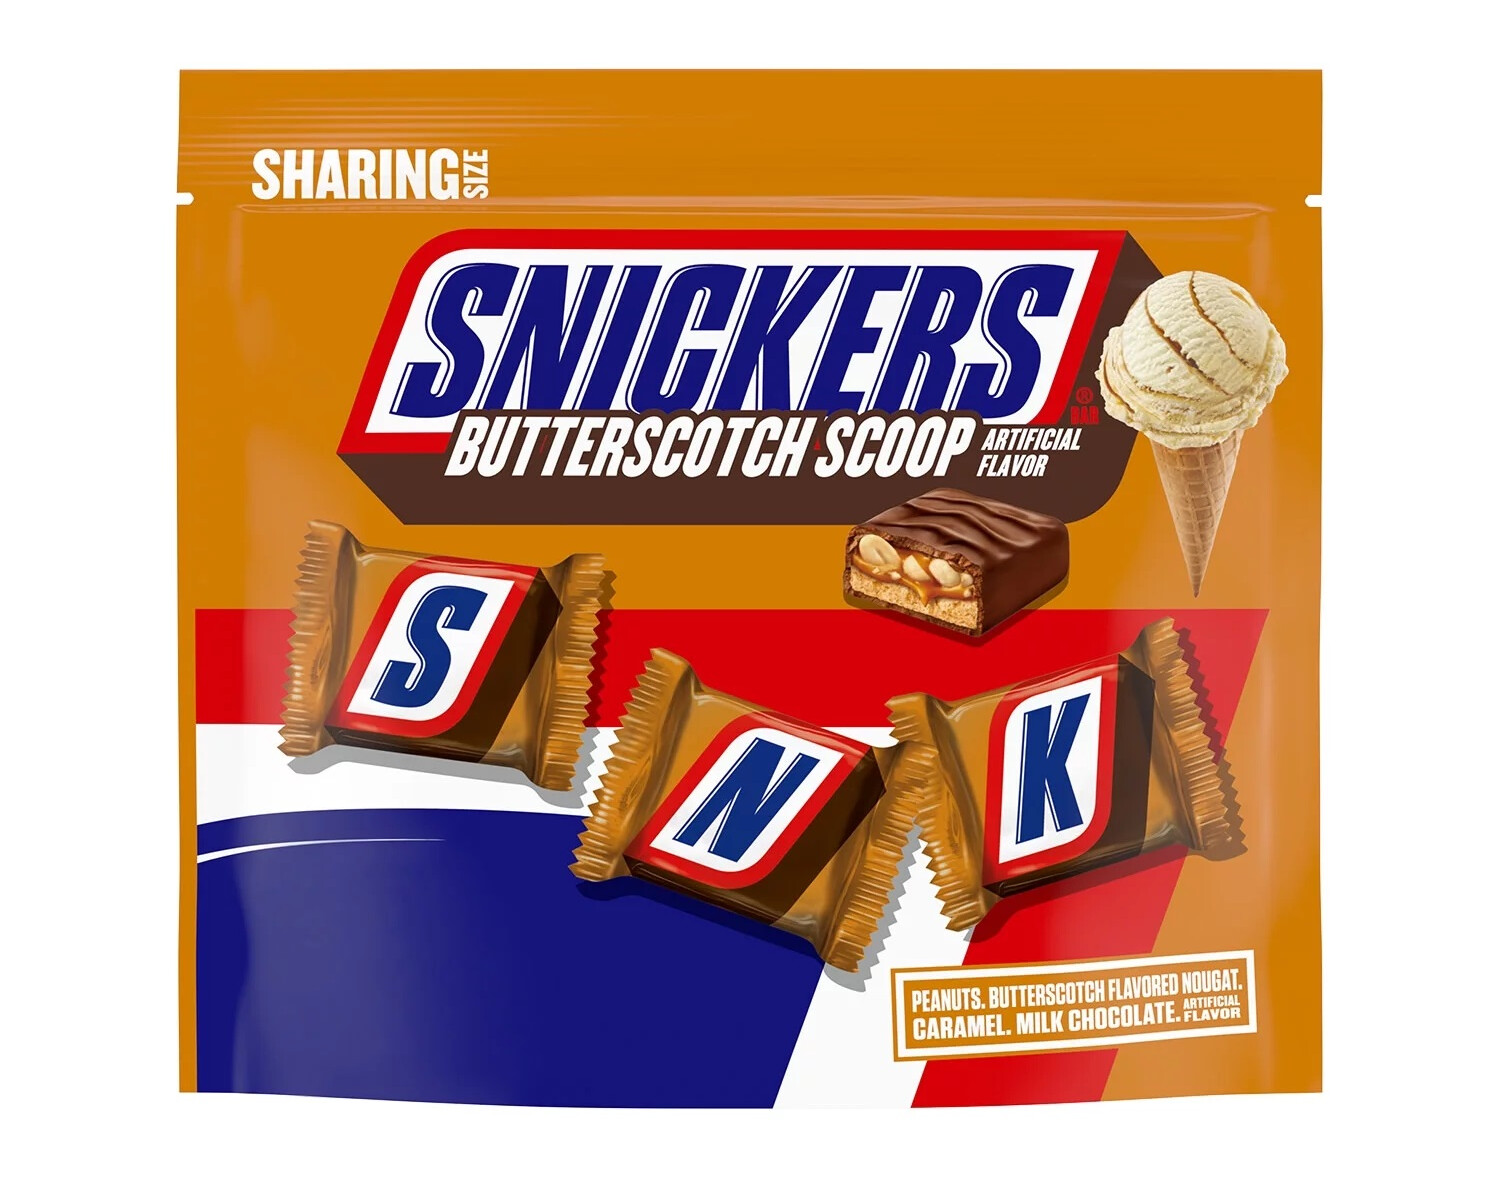 Share Pack    Snickers Butterscotch Scoop